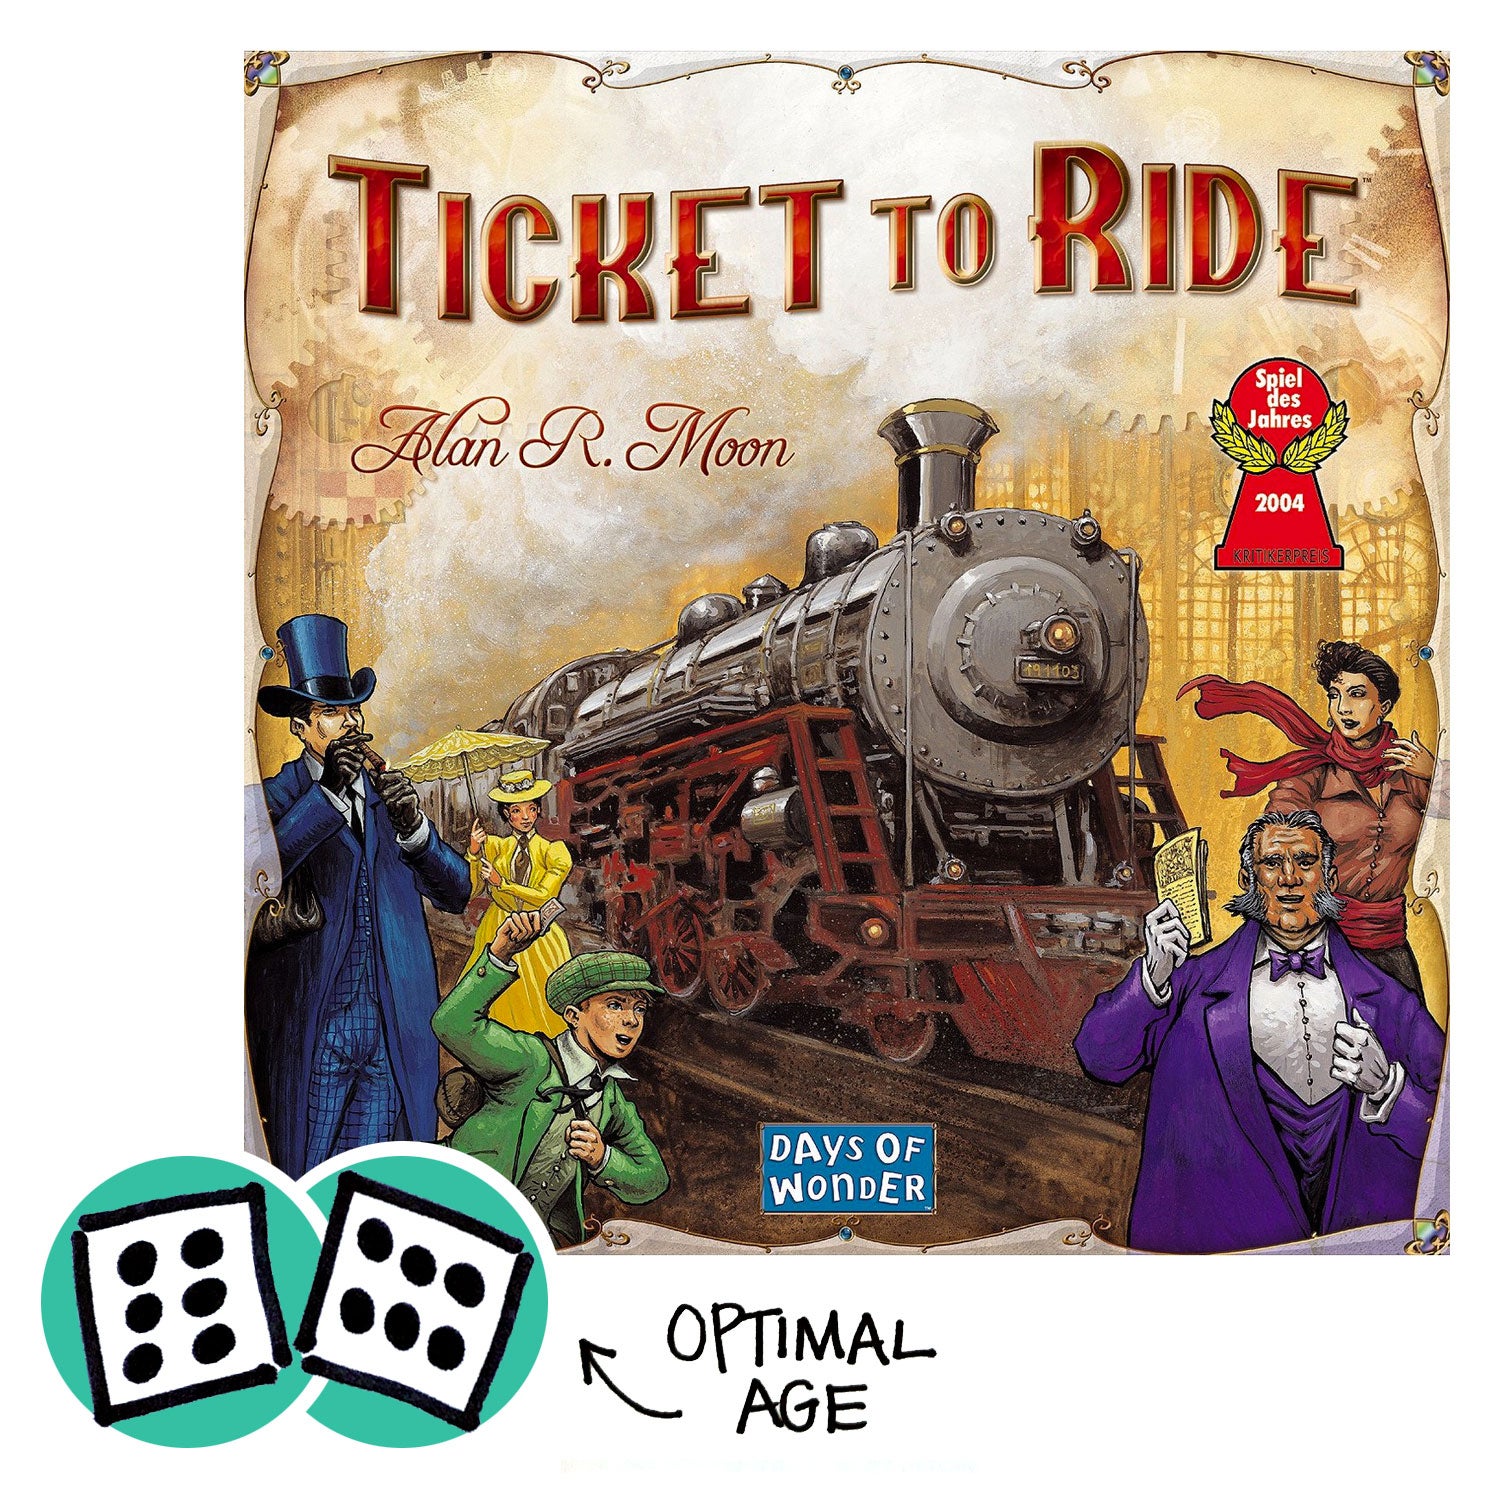 Ticket to Ride.